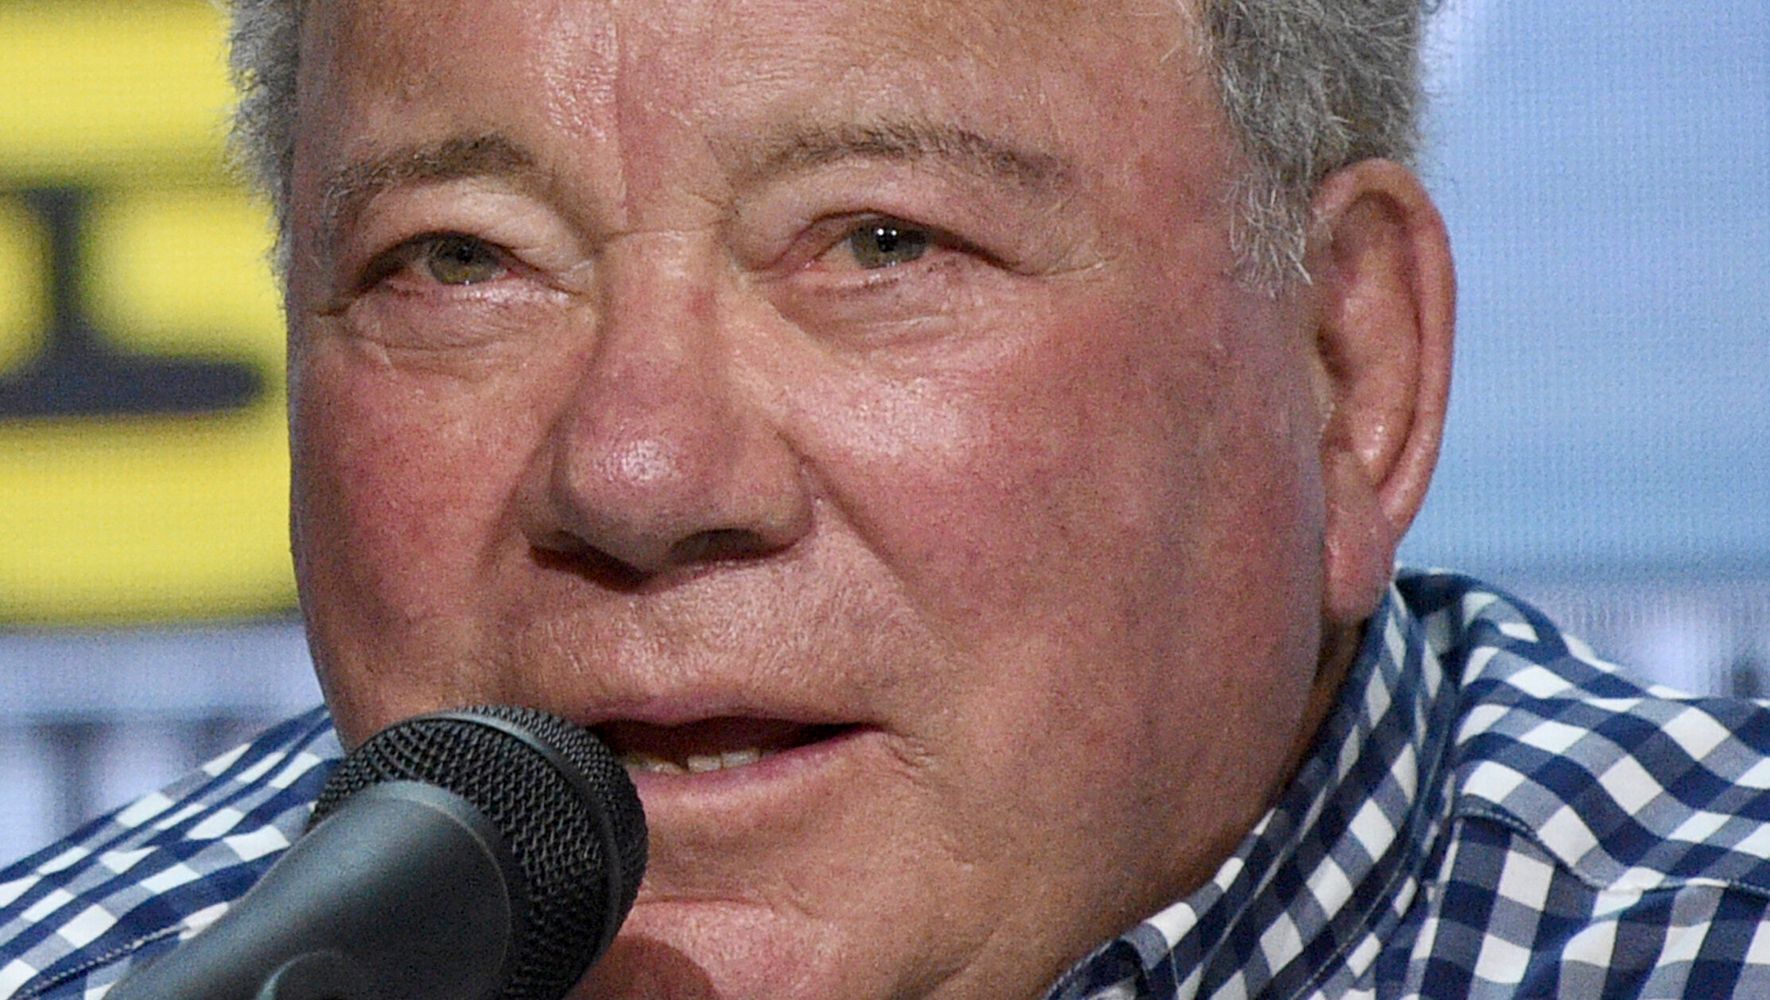 William Shatner's Lost Wallet Found At California Fruit Stand